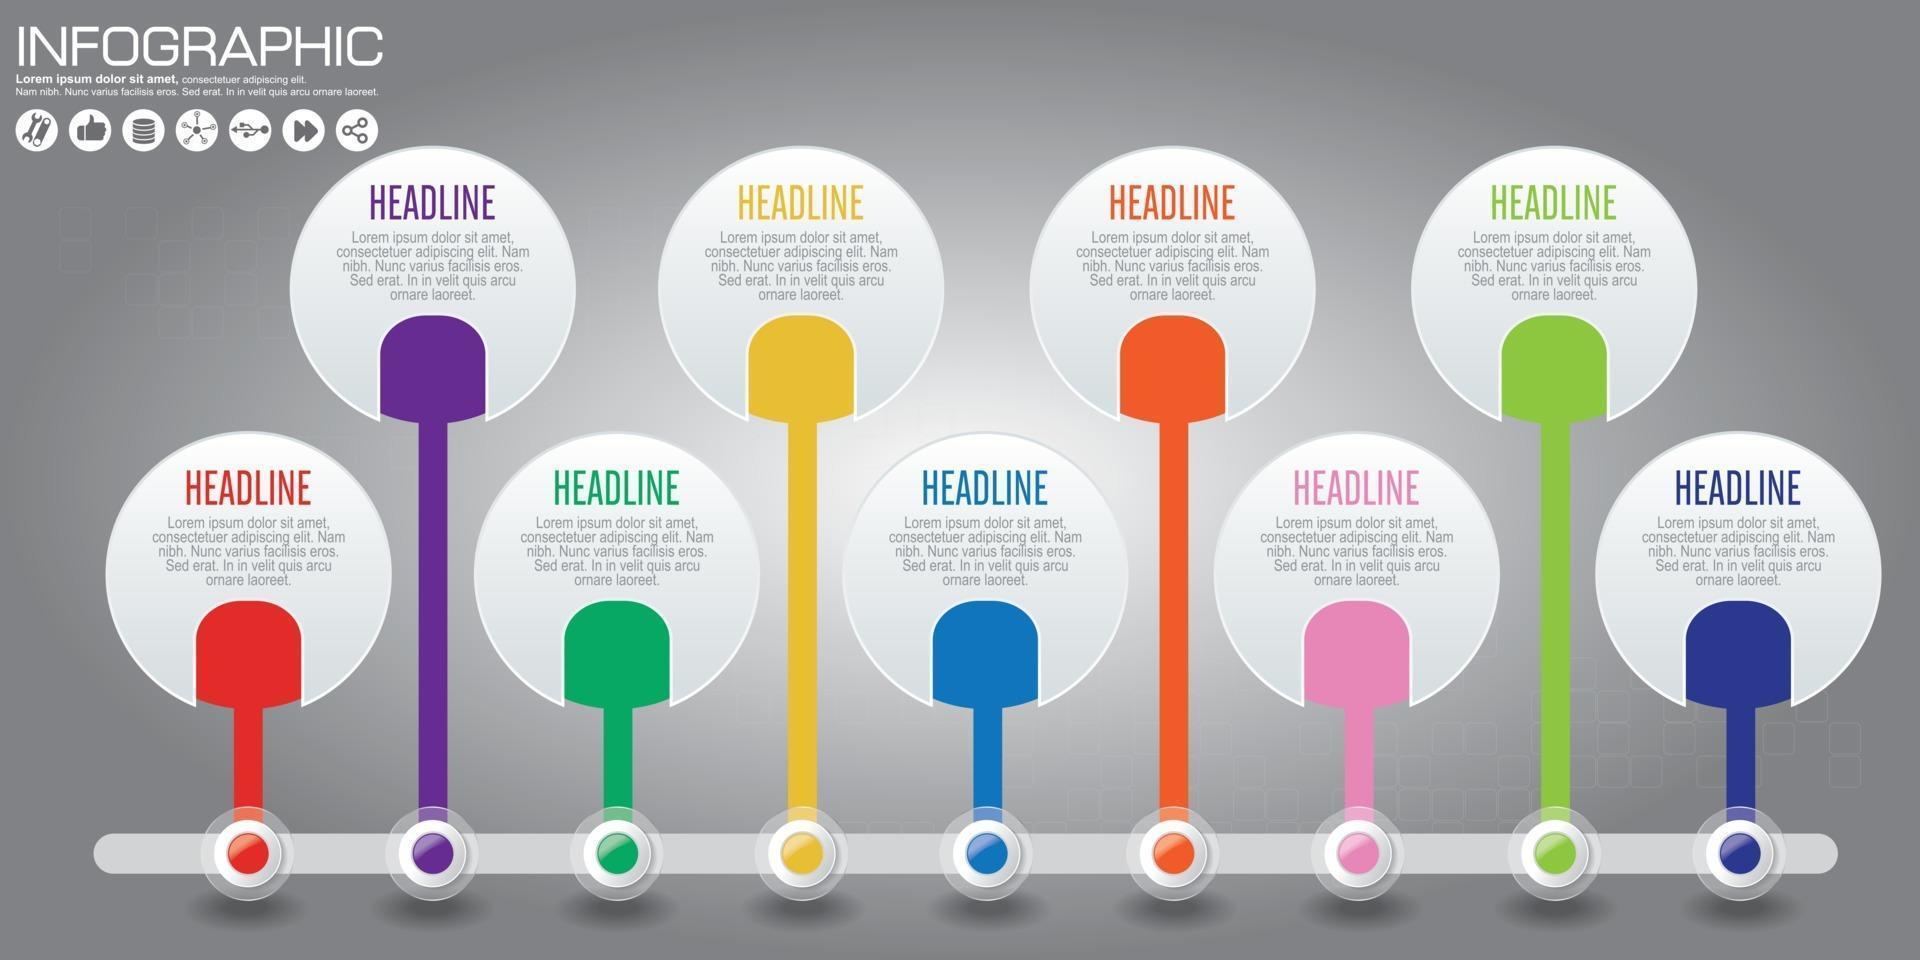 INFOGRAPHIC TIMELINE CONCEPT vector